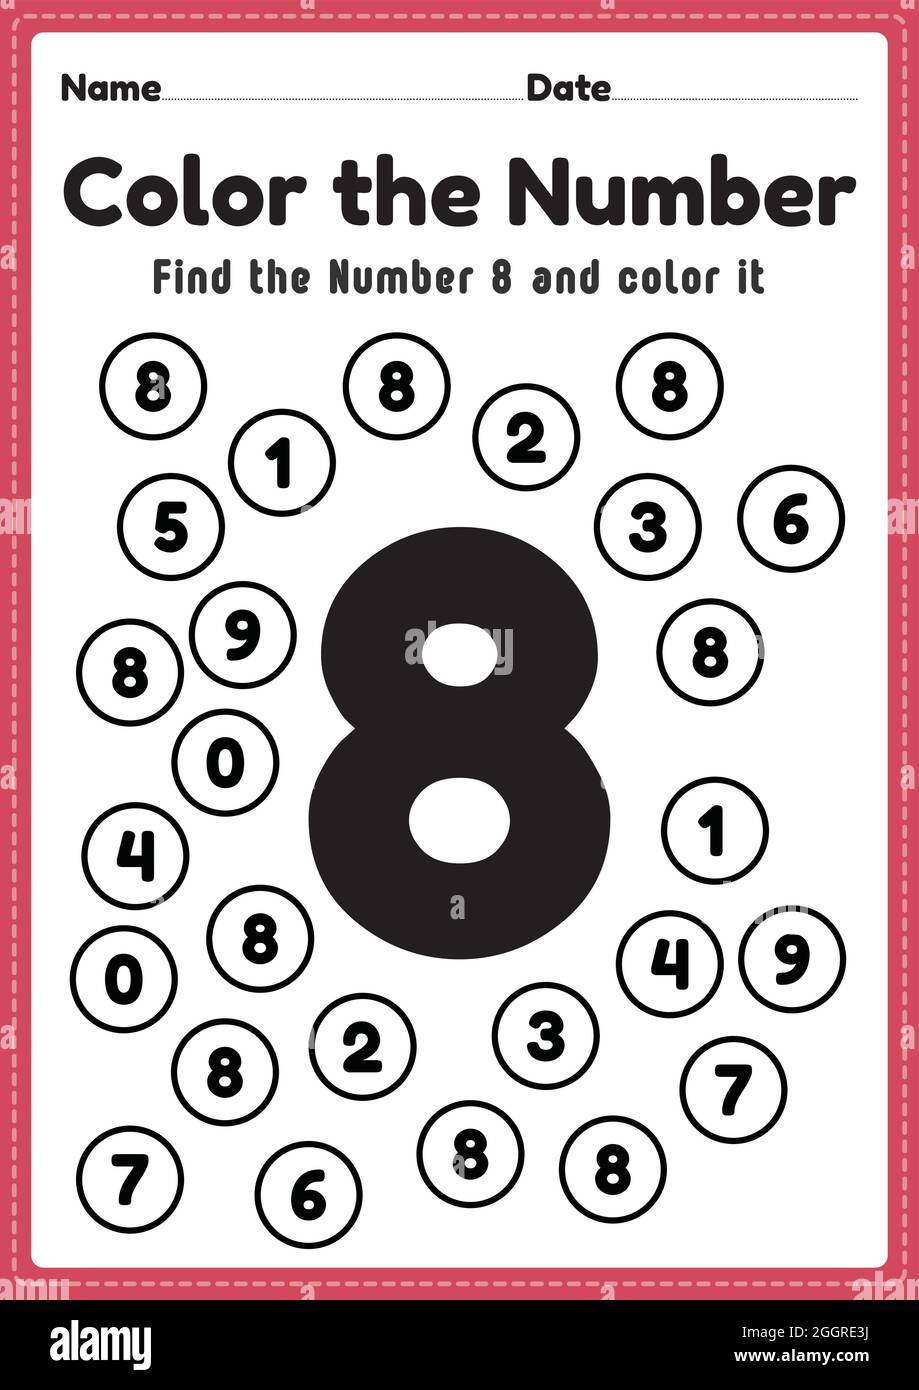 number worksheets for kindergarten number 8 coloring math activities for preschool kids to learn basic mathematics skills in a printable page stock vector image art alamy